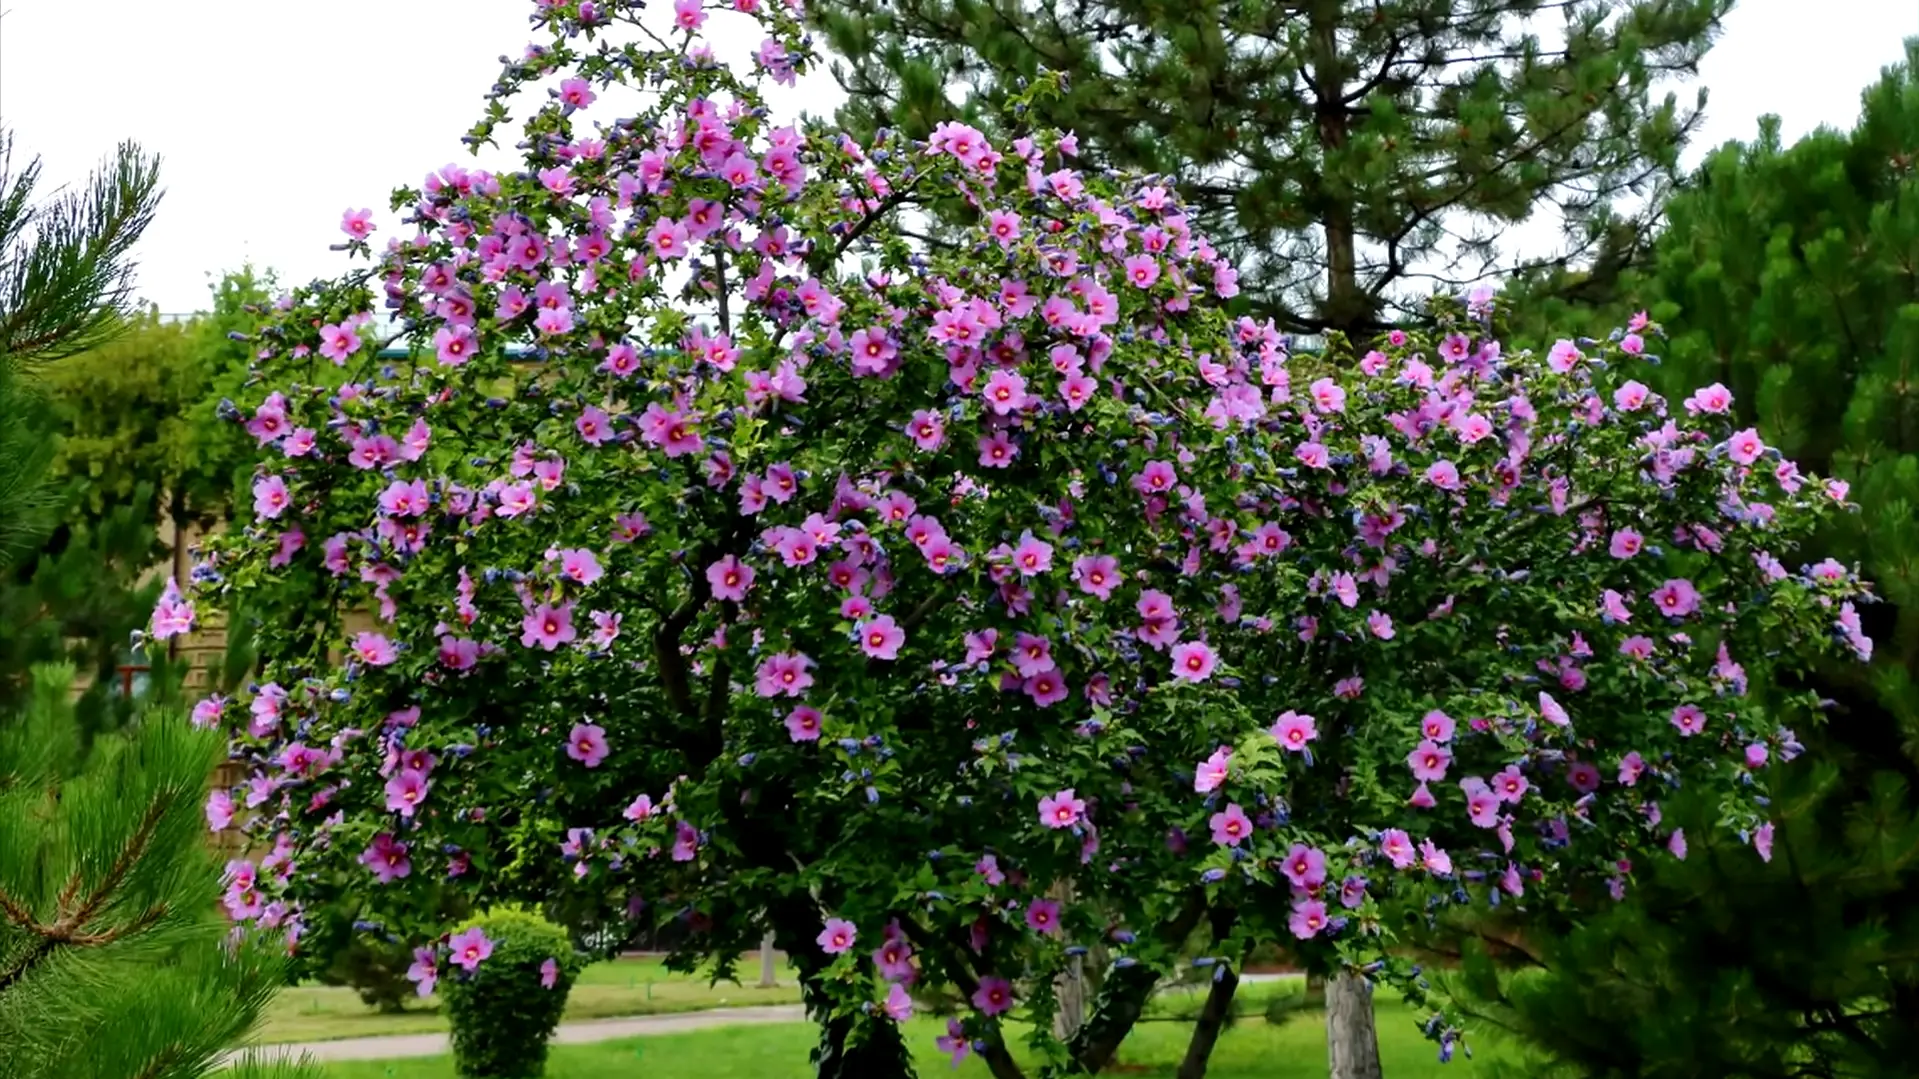 Popularity of Hibiscus Braided Tree as outdoor decoration